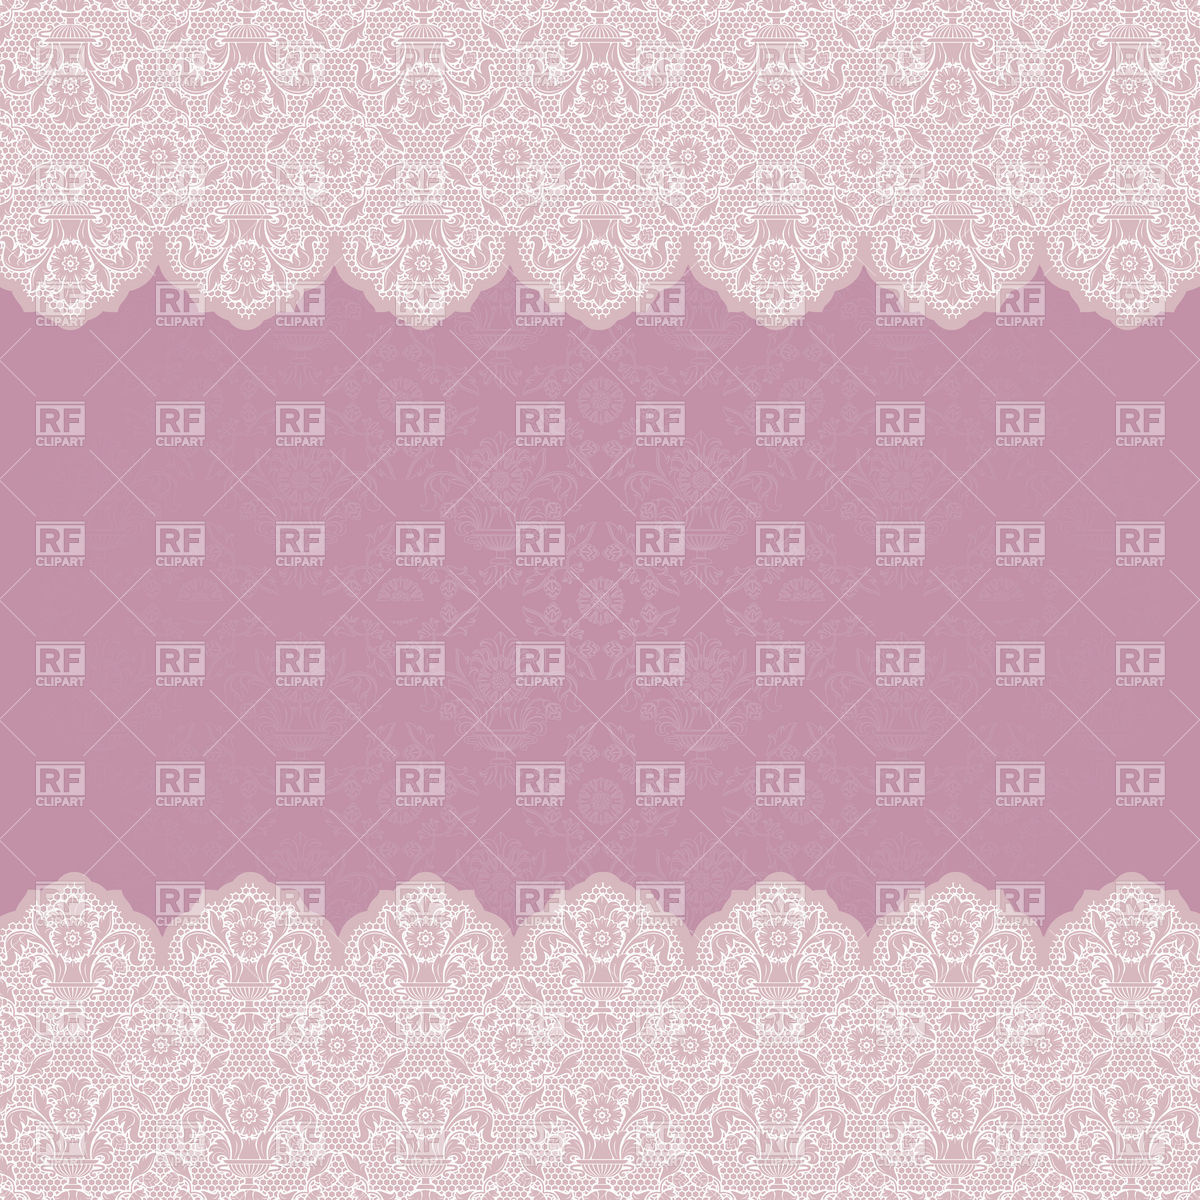 Lilac vintage wallpaper with lacy border 18851 download royalty free